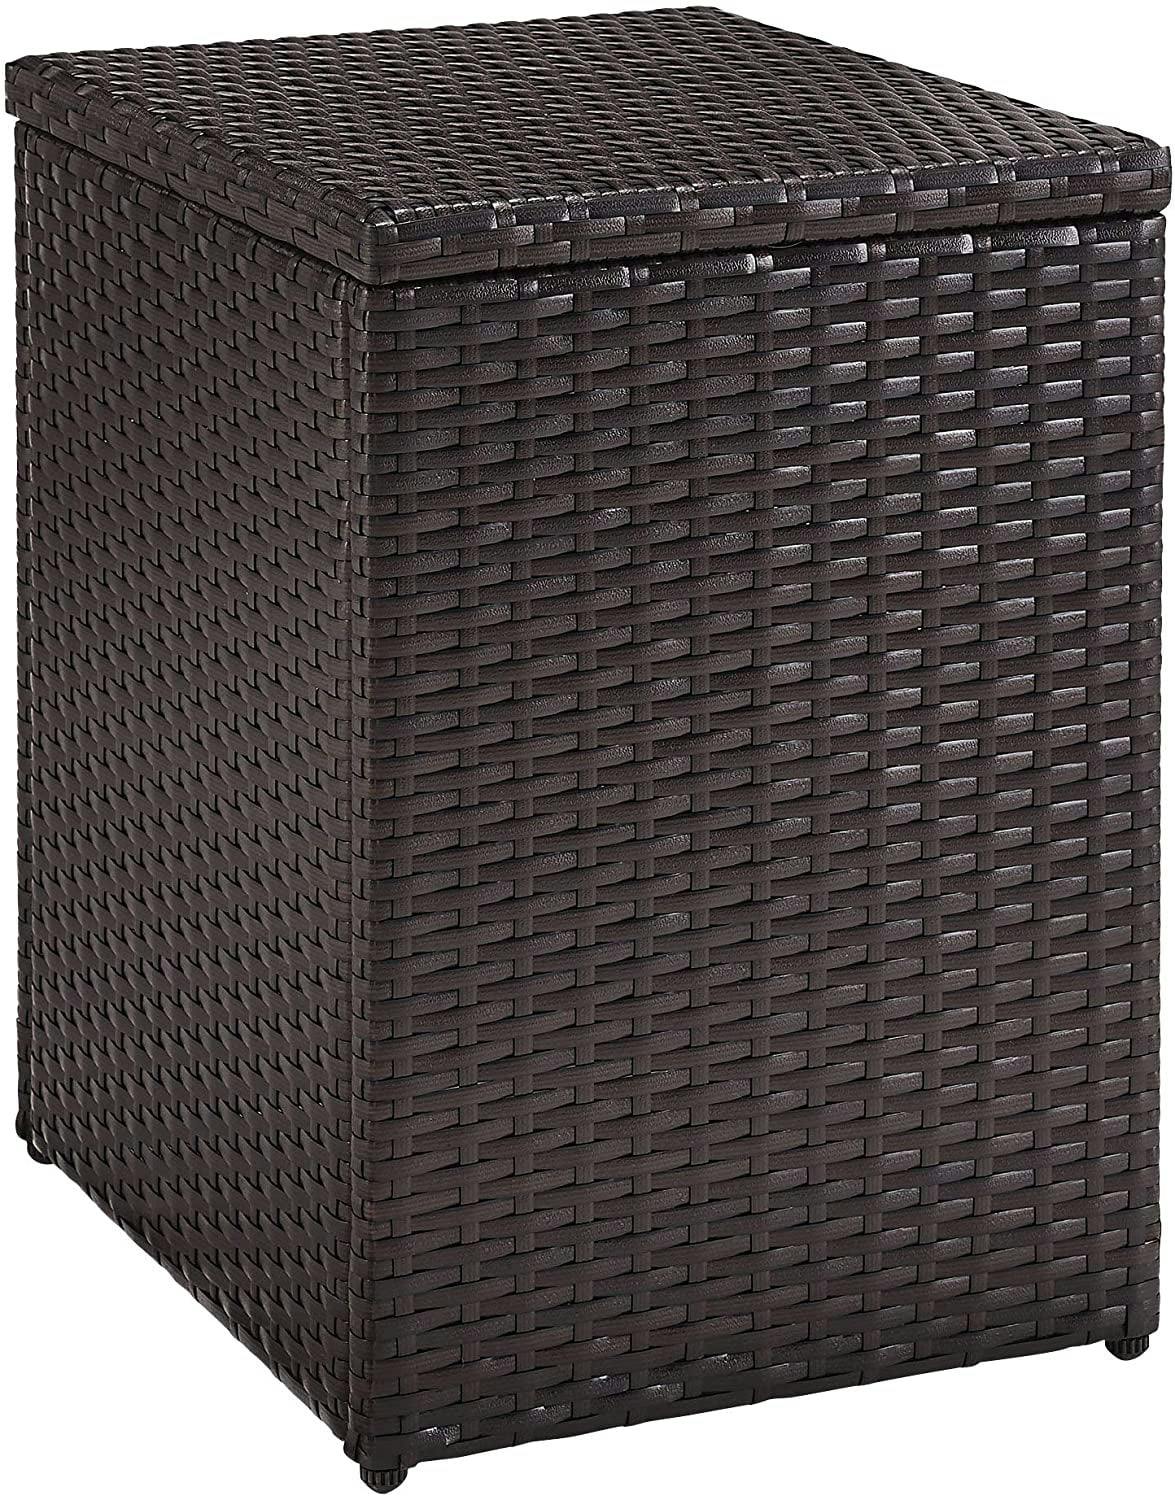 Modern Chic All-Weather Wicker Outdoor Side Table in Dark Brown